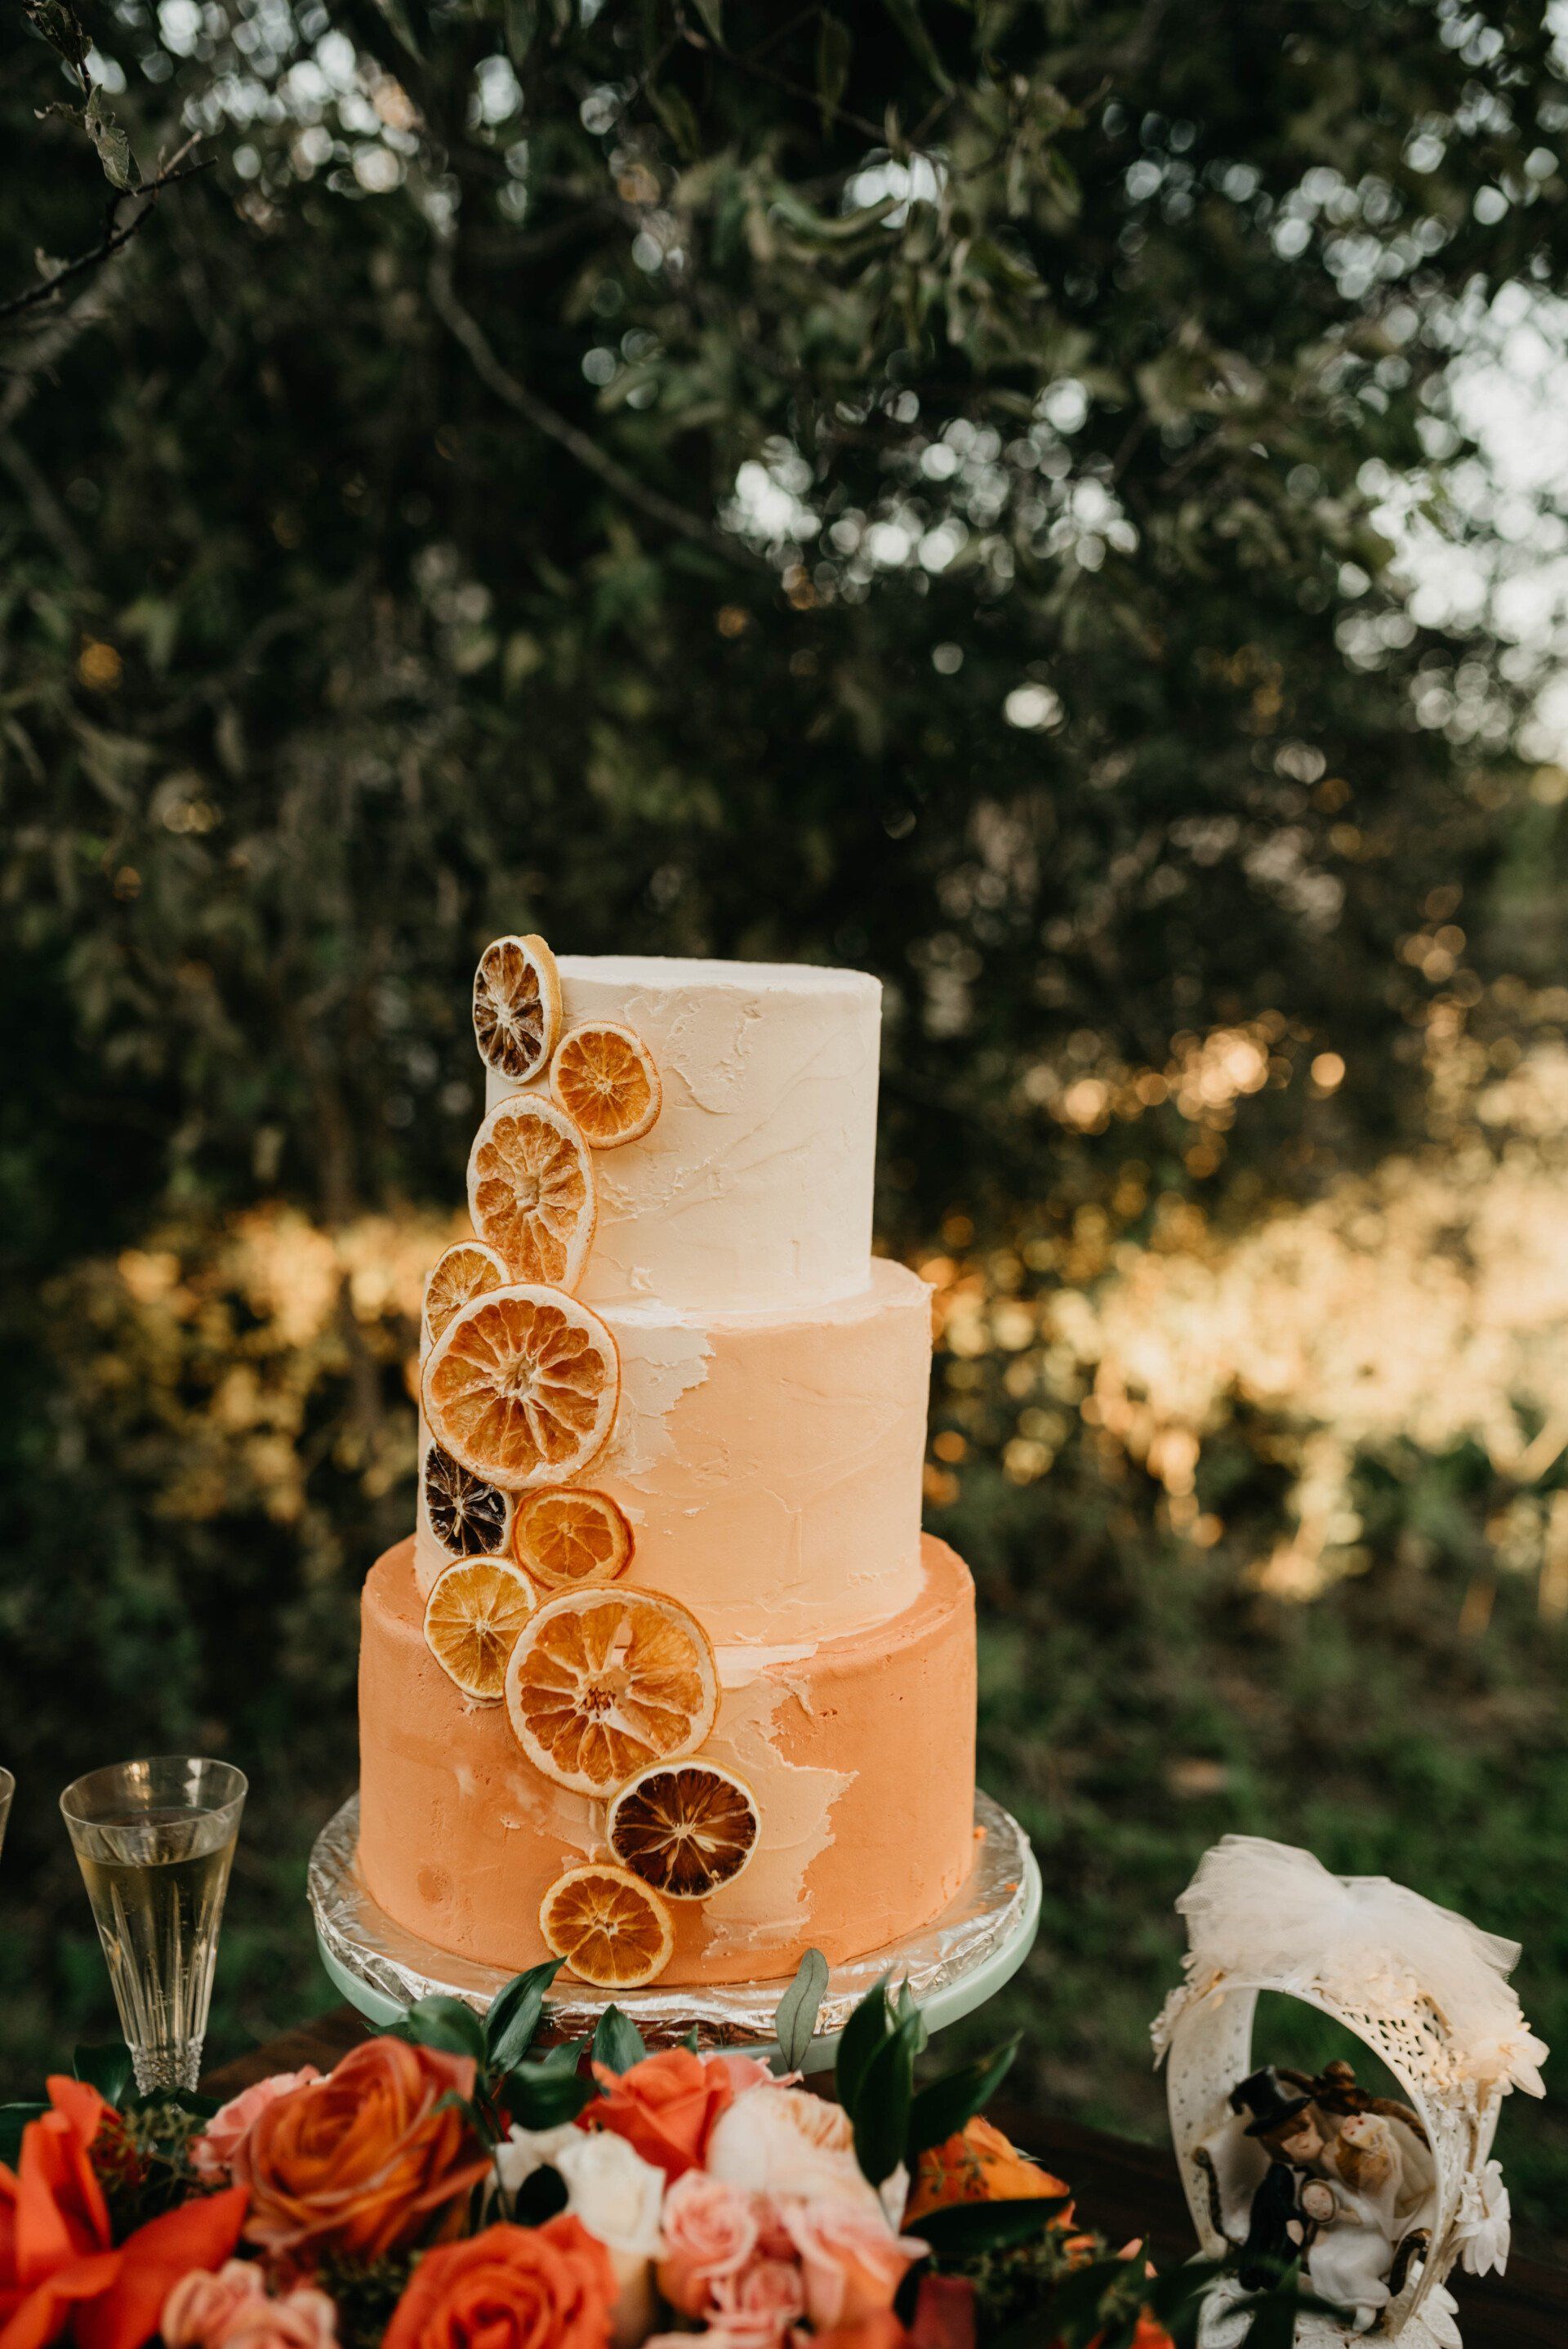 a three tiered cake with orange slices on it